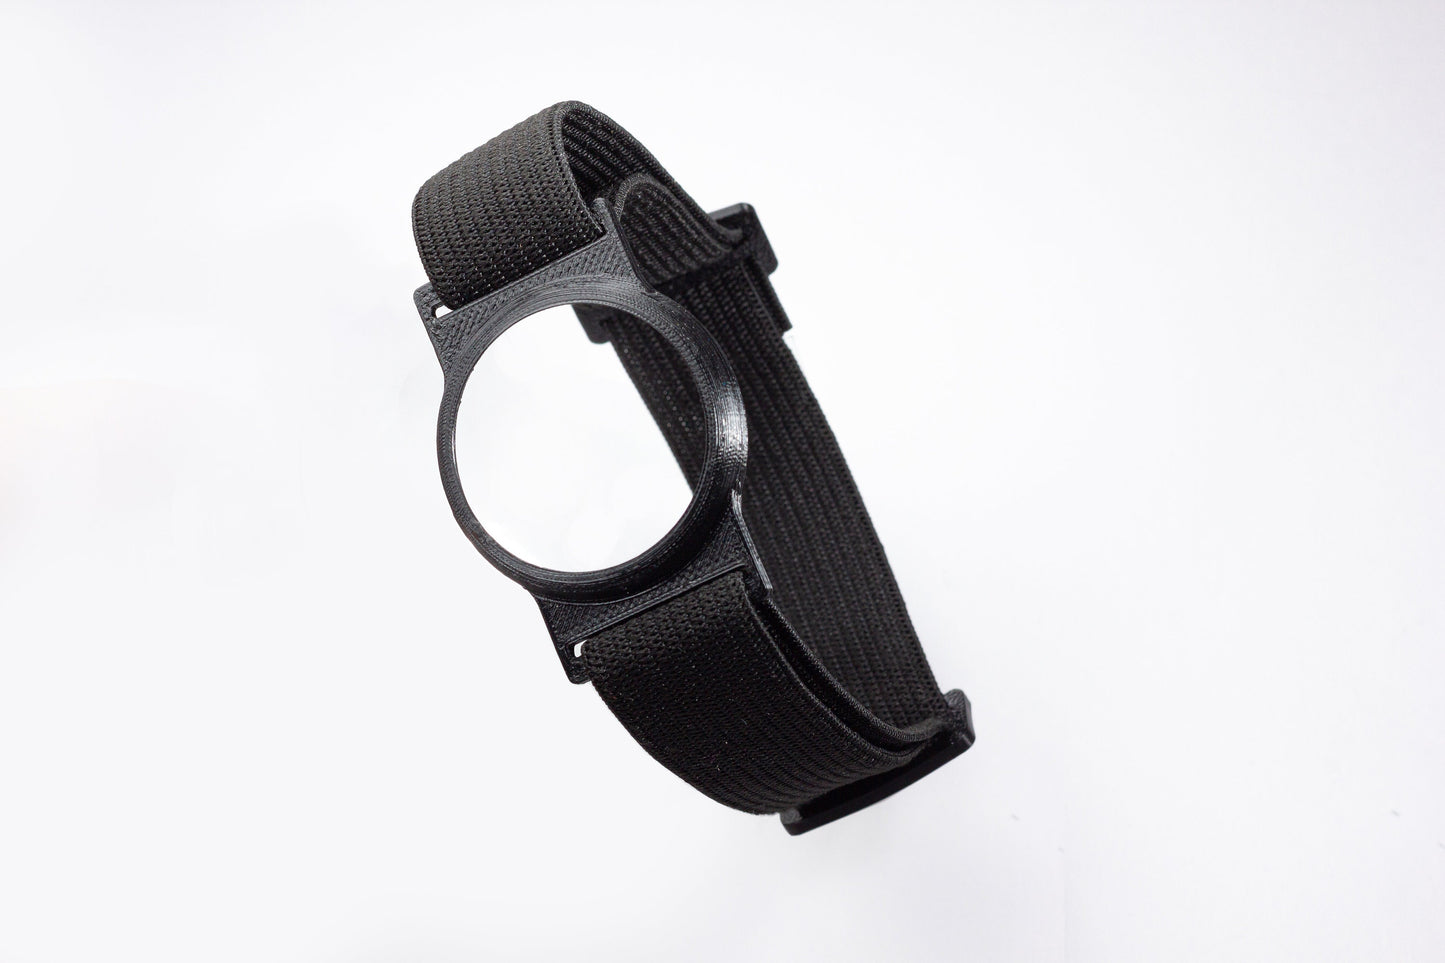 Freestyle Libre Sensor Armband for Protecting your Freestyle Libre Sensor Black Holder with Black or White Band